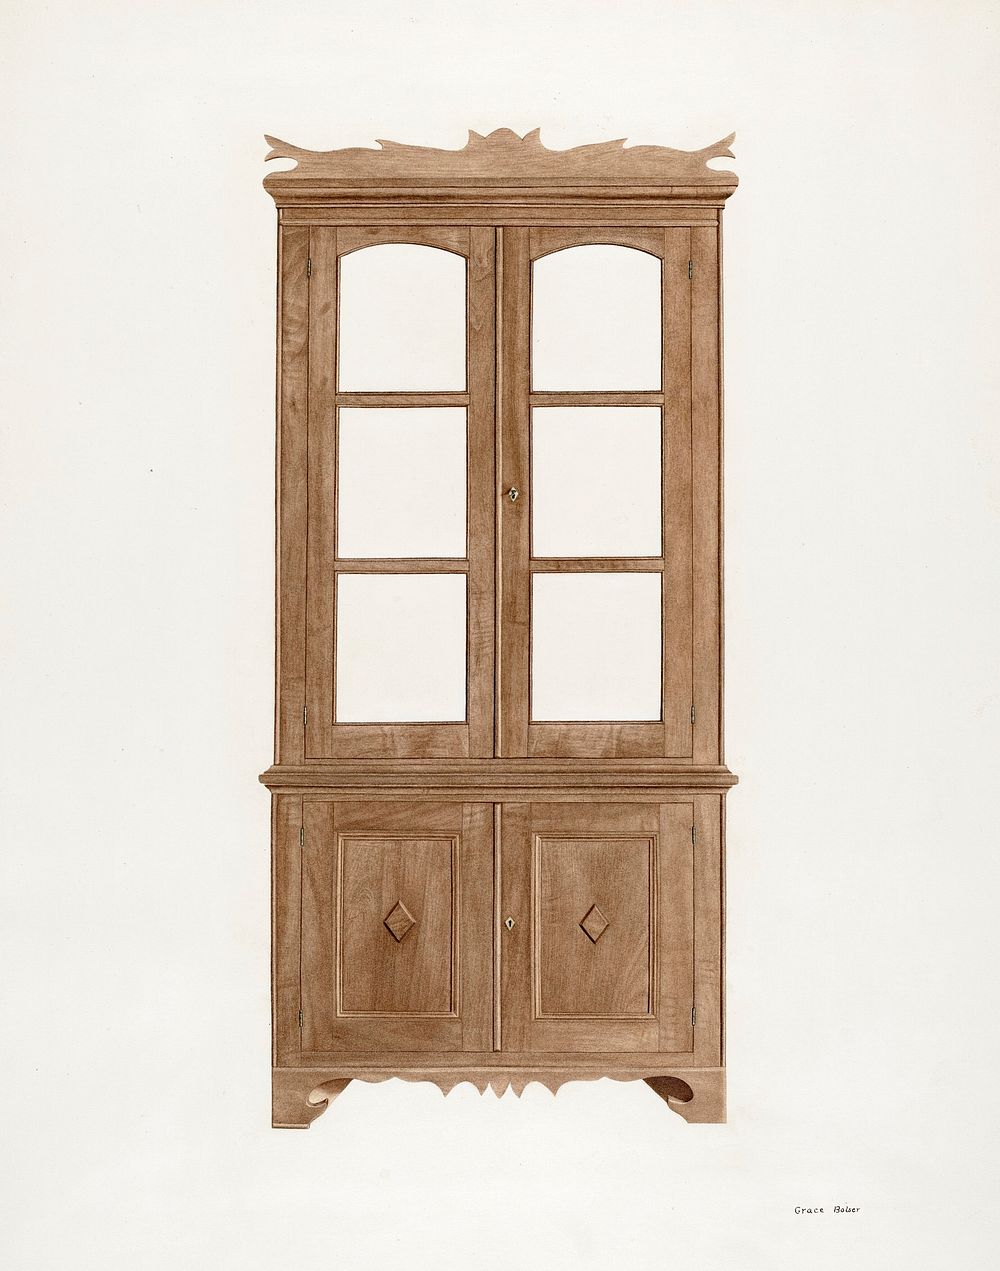 China Closet (ca. 1940) by Grace Bolser. Original from The National Gallery of Art. Digitally enhanced by rawpixel.